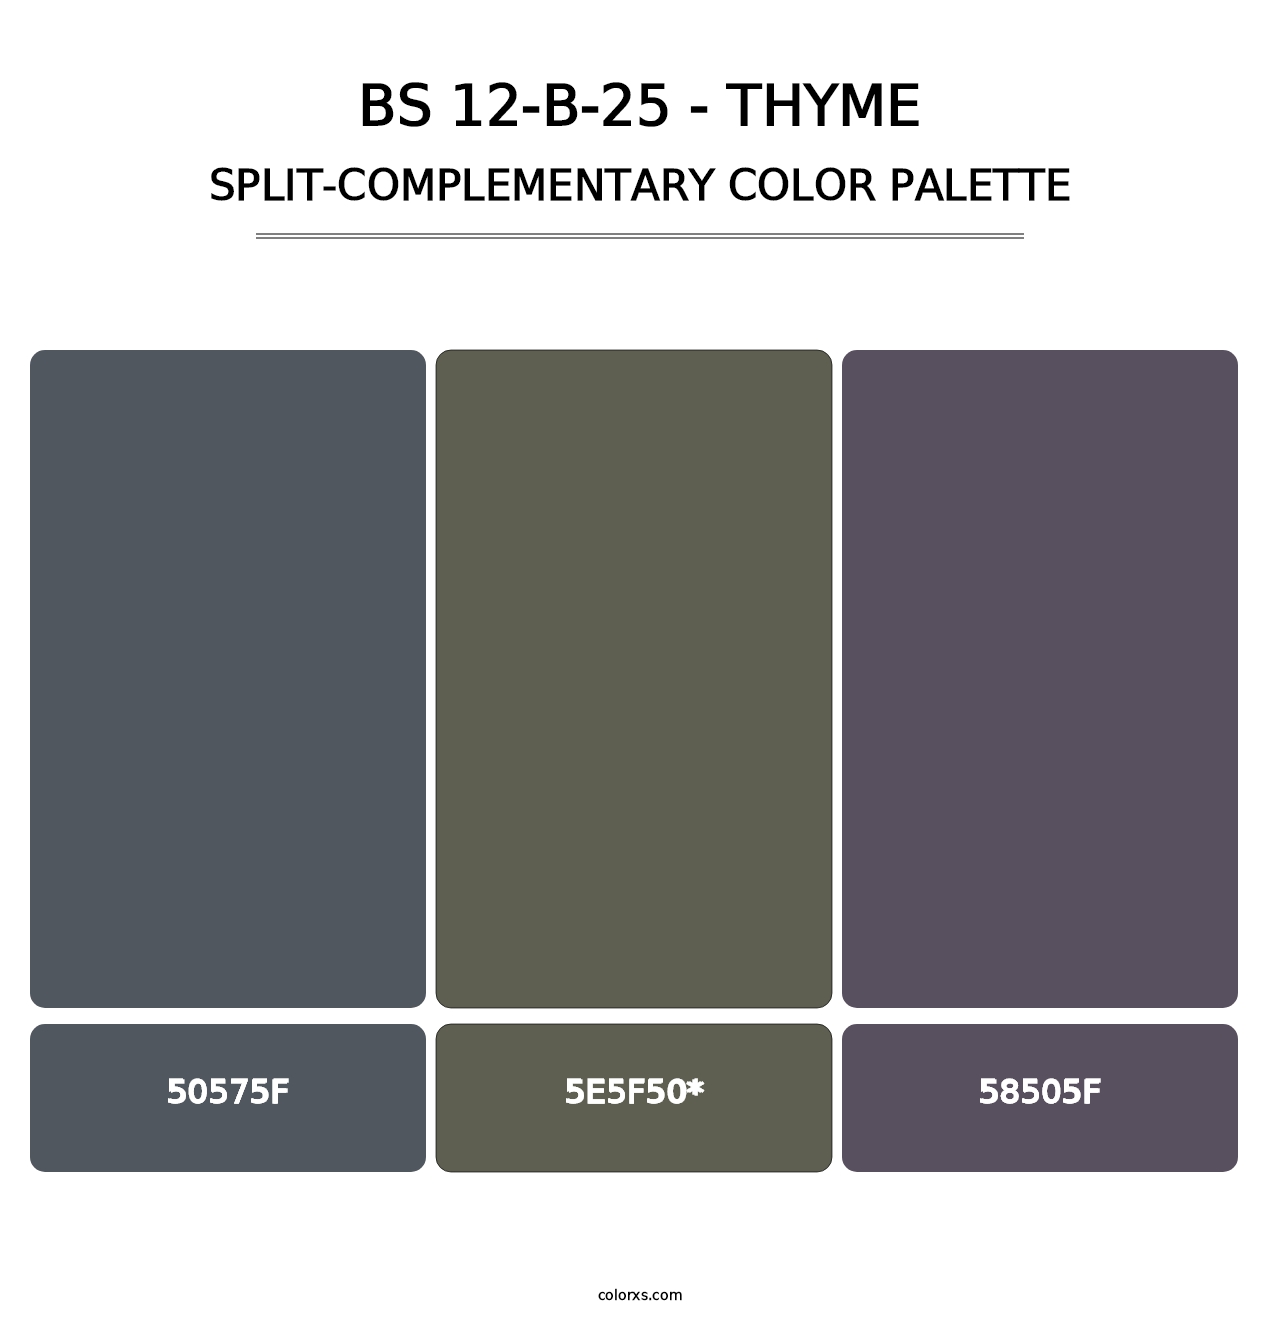 BS 12-B-25 - Thyme - Split-Complementary Color Palette